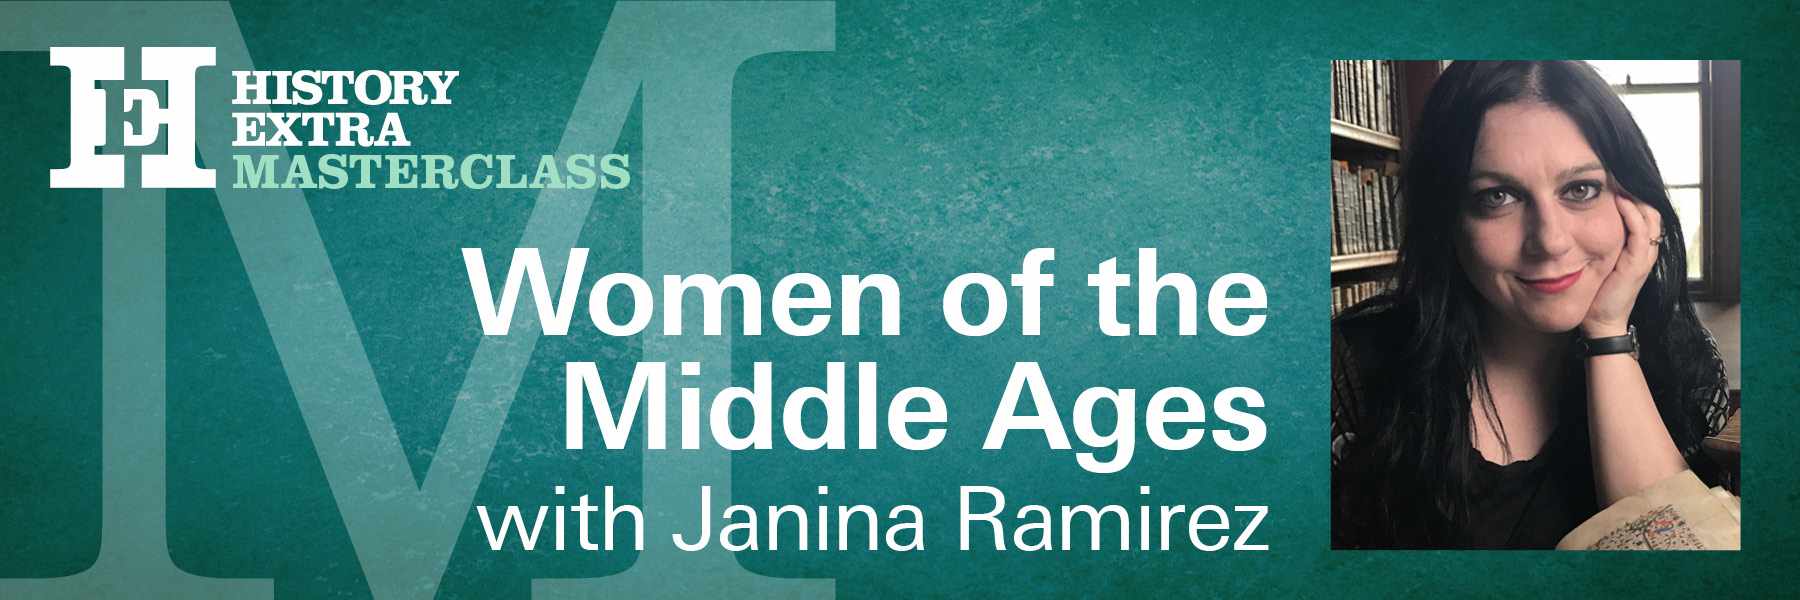 Women of the Middle Ages with Janina Ramirez video series banner